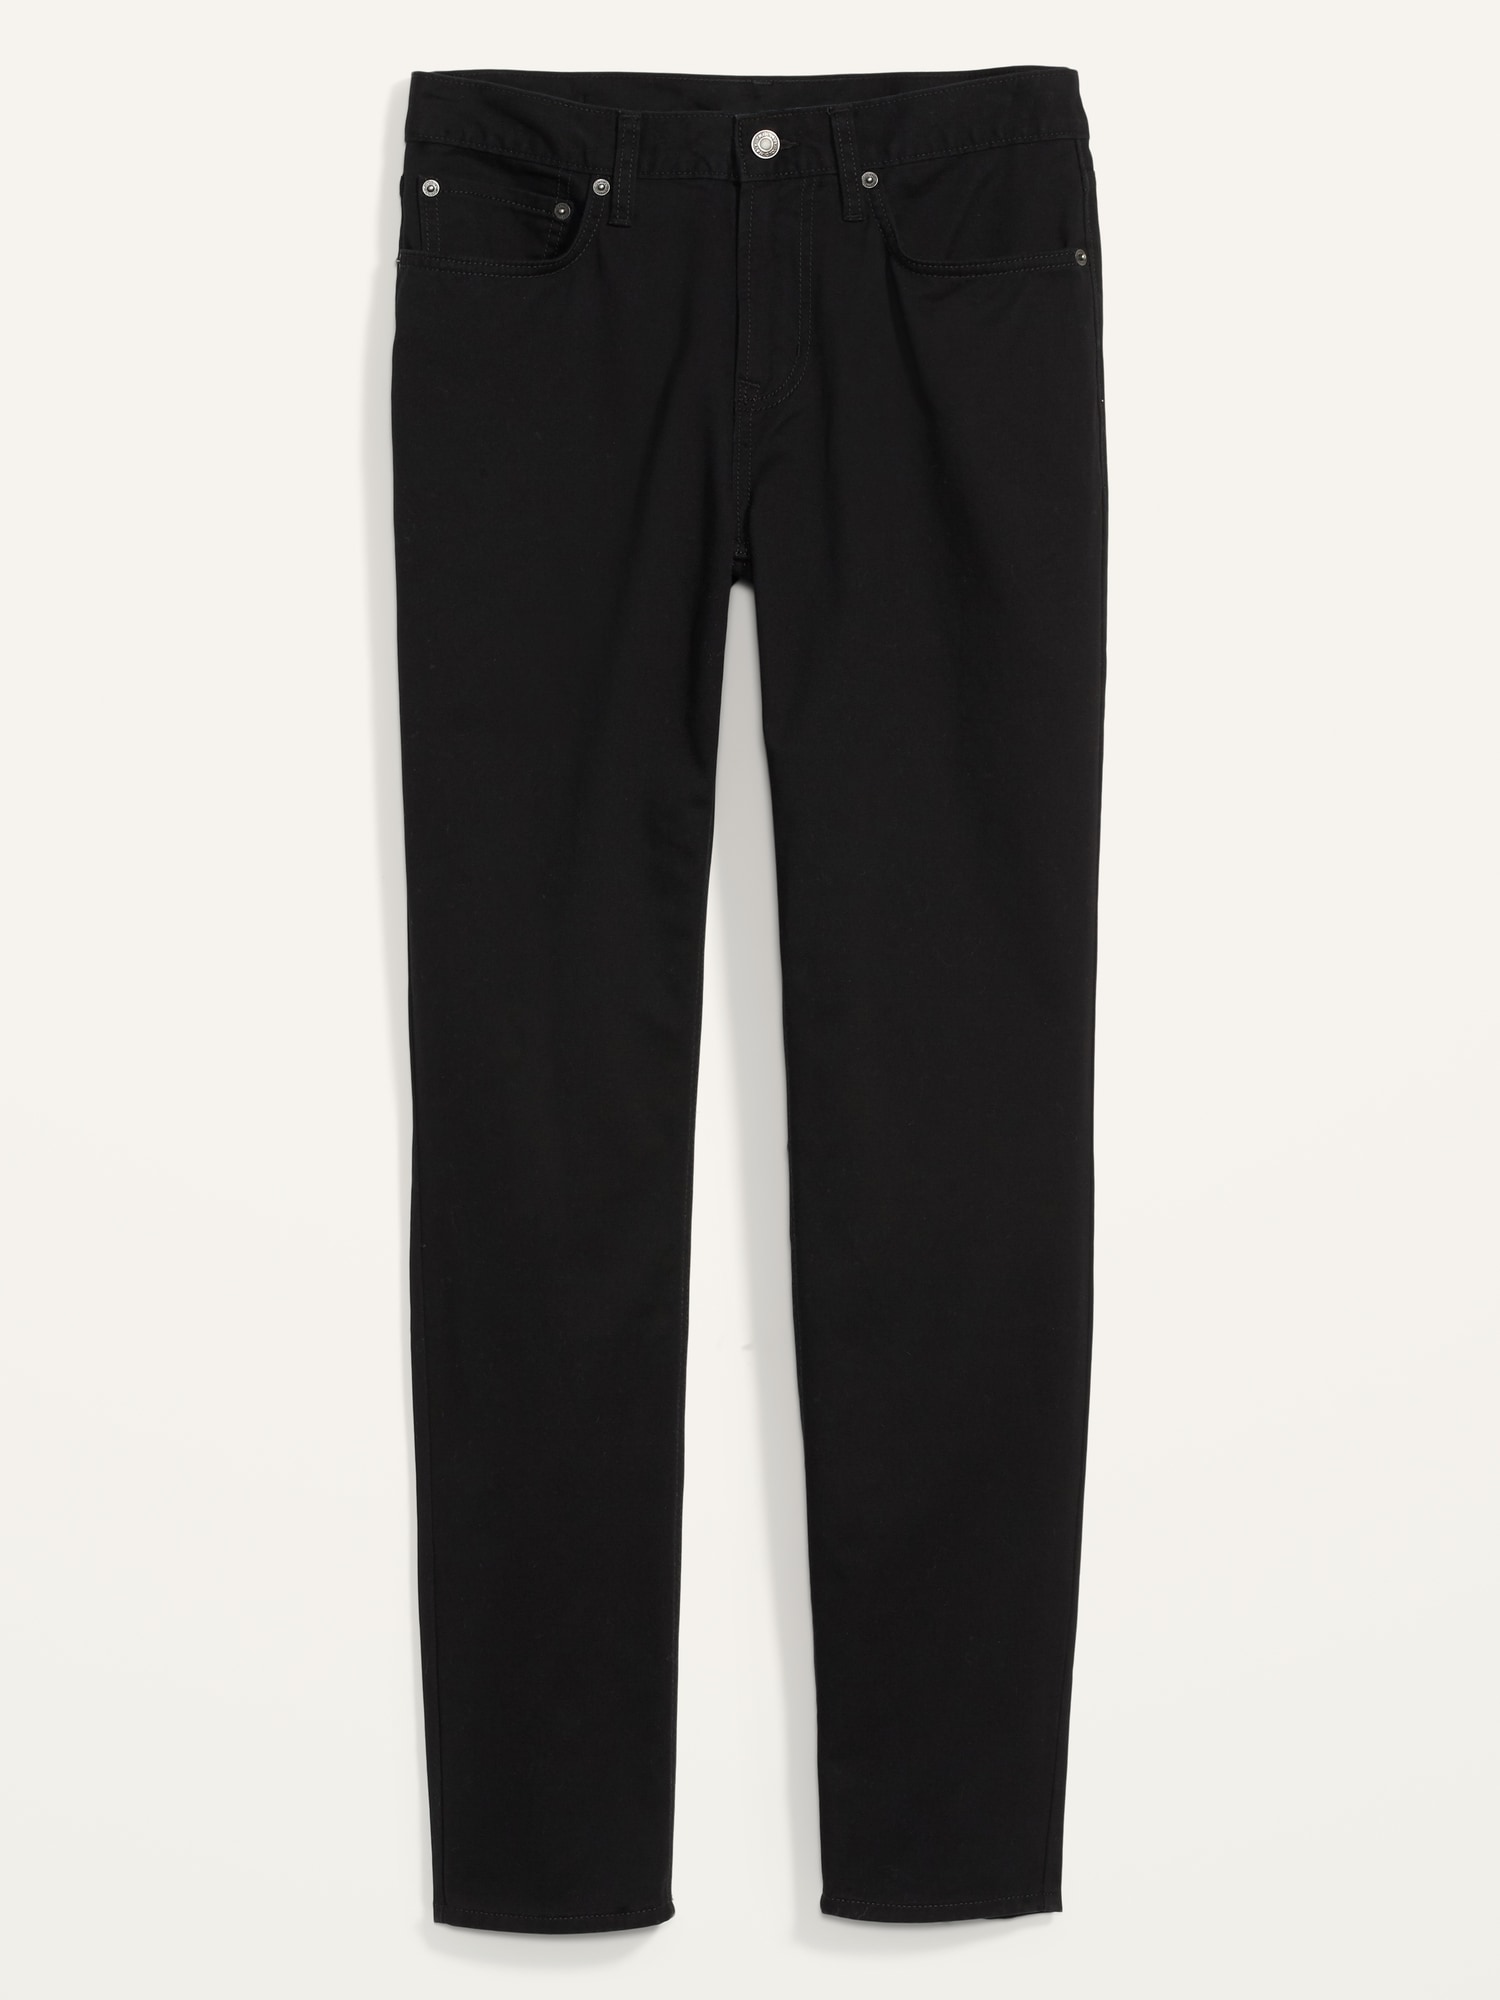 Wow Athletic Taper Non-Stretch Five-Pocket Pants